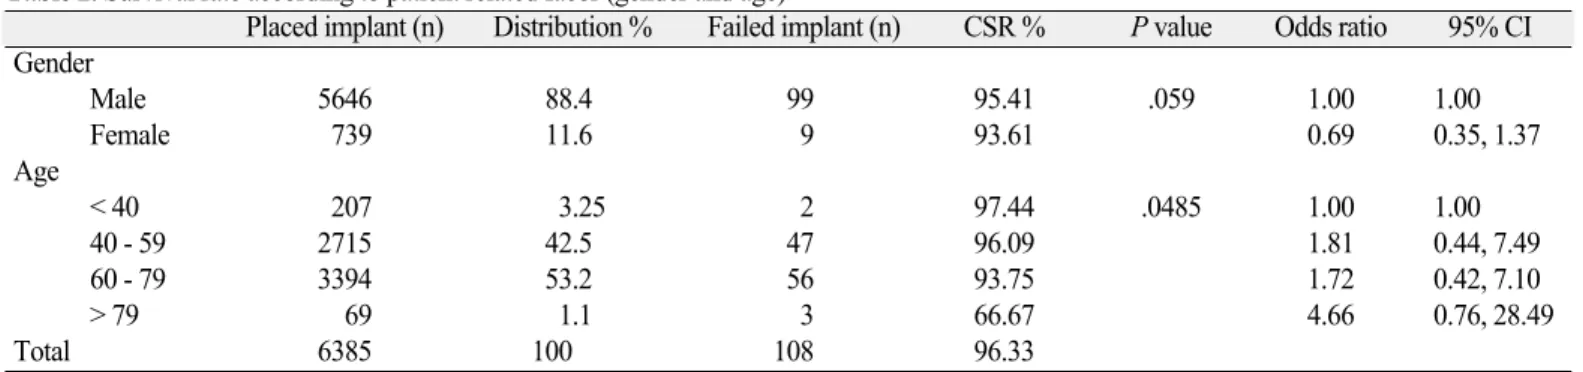 Table 3. Survival rate according to implant type and surface 